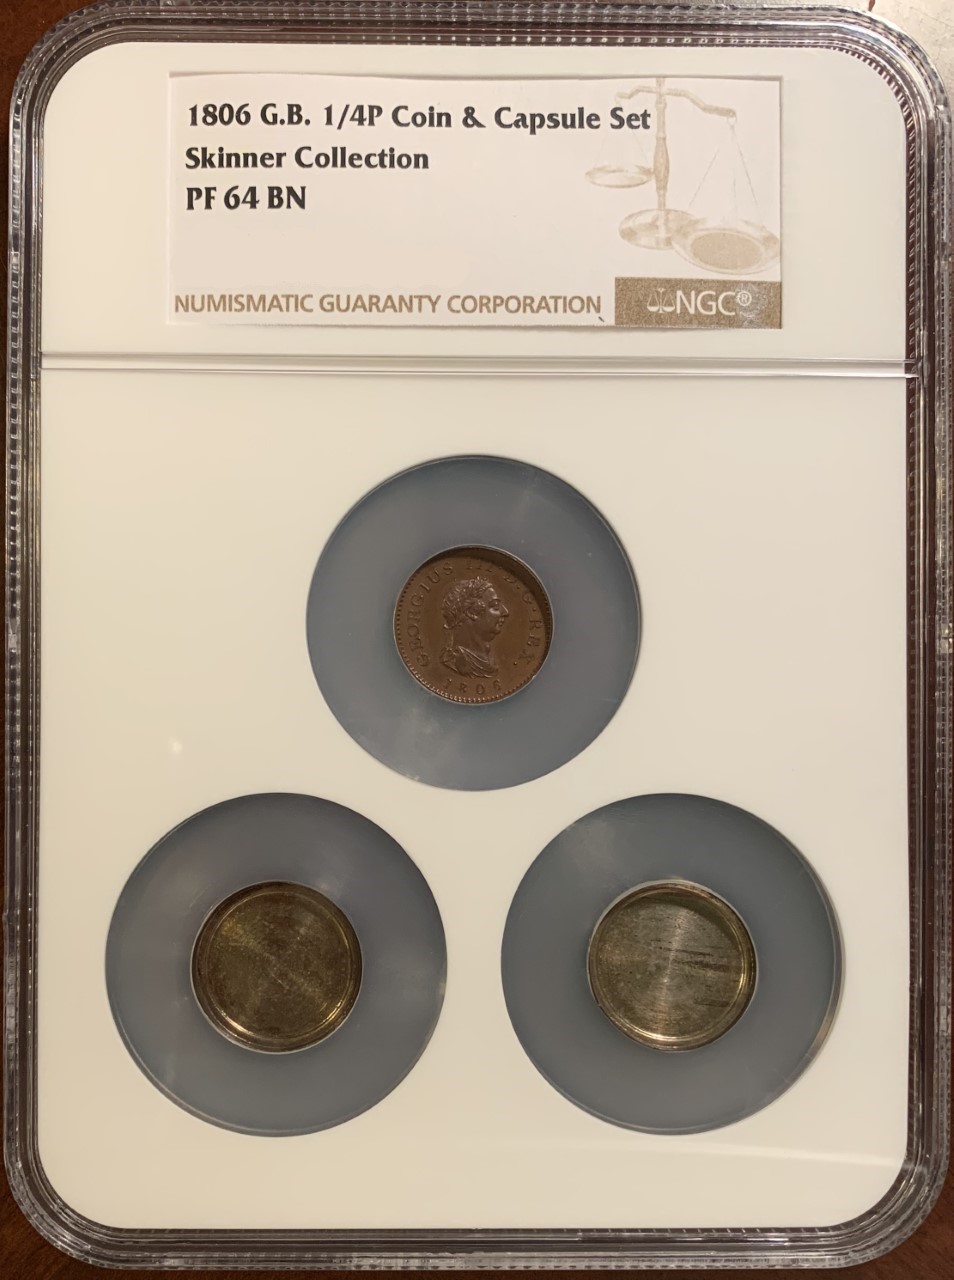 1806 Great Britain Proof Farthing P-1391 with shells NGC PF-64 BN Skinner Collection Obv..jpg